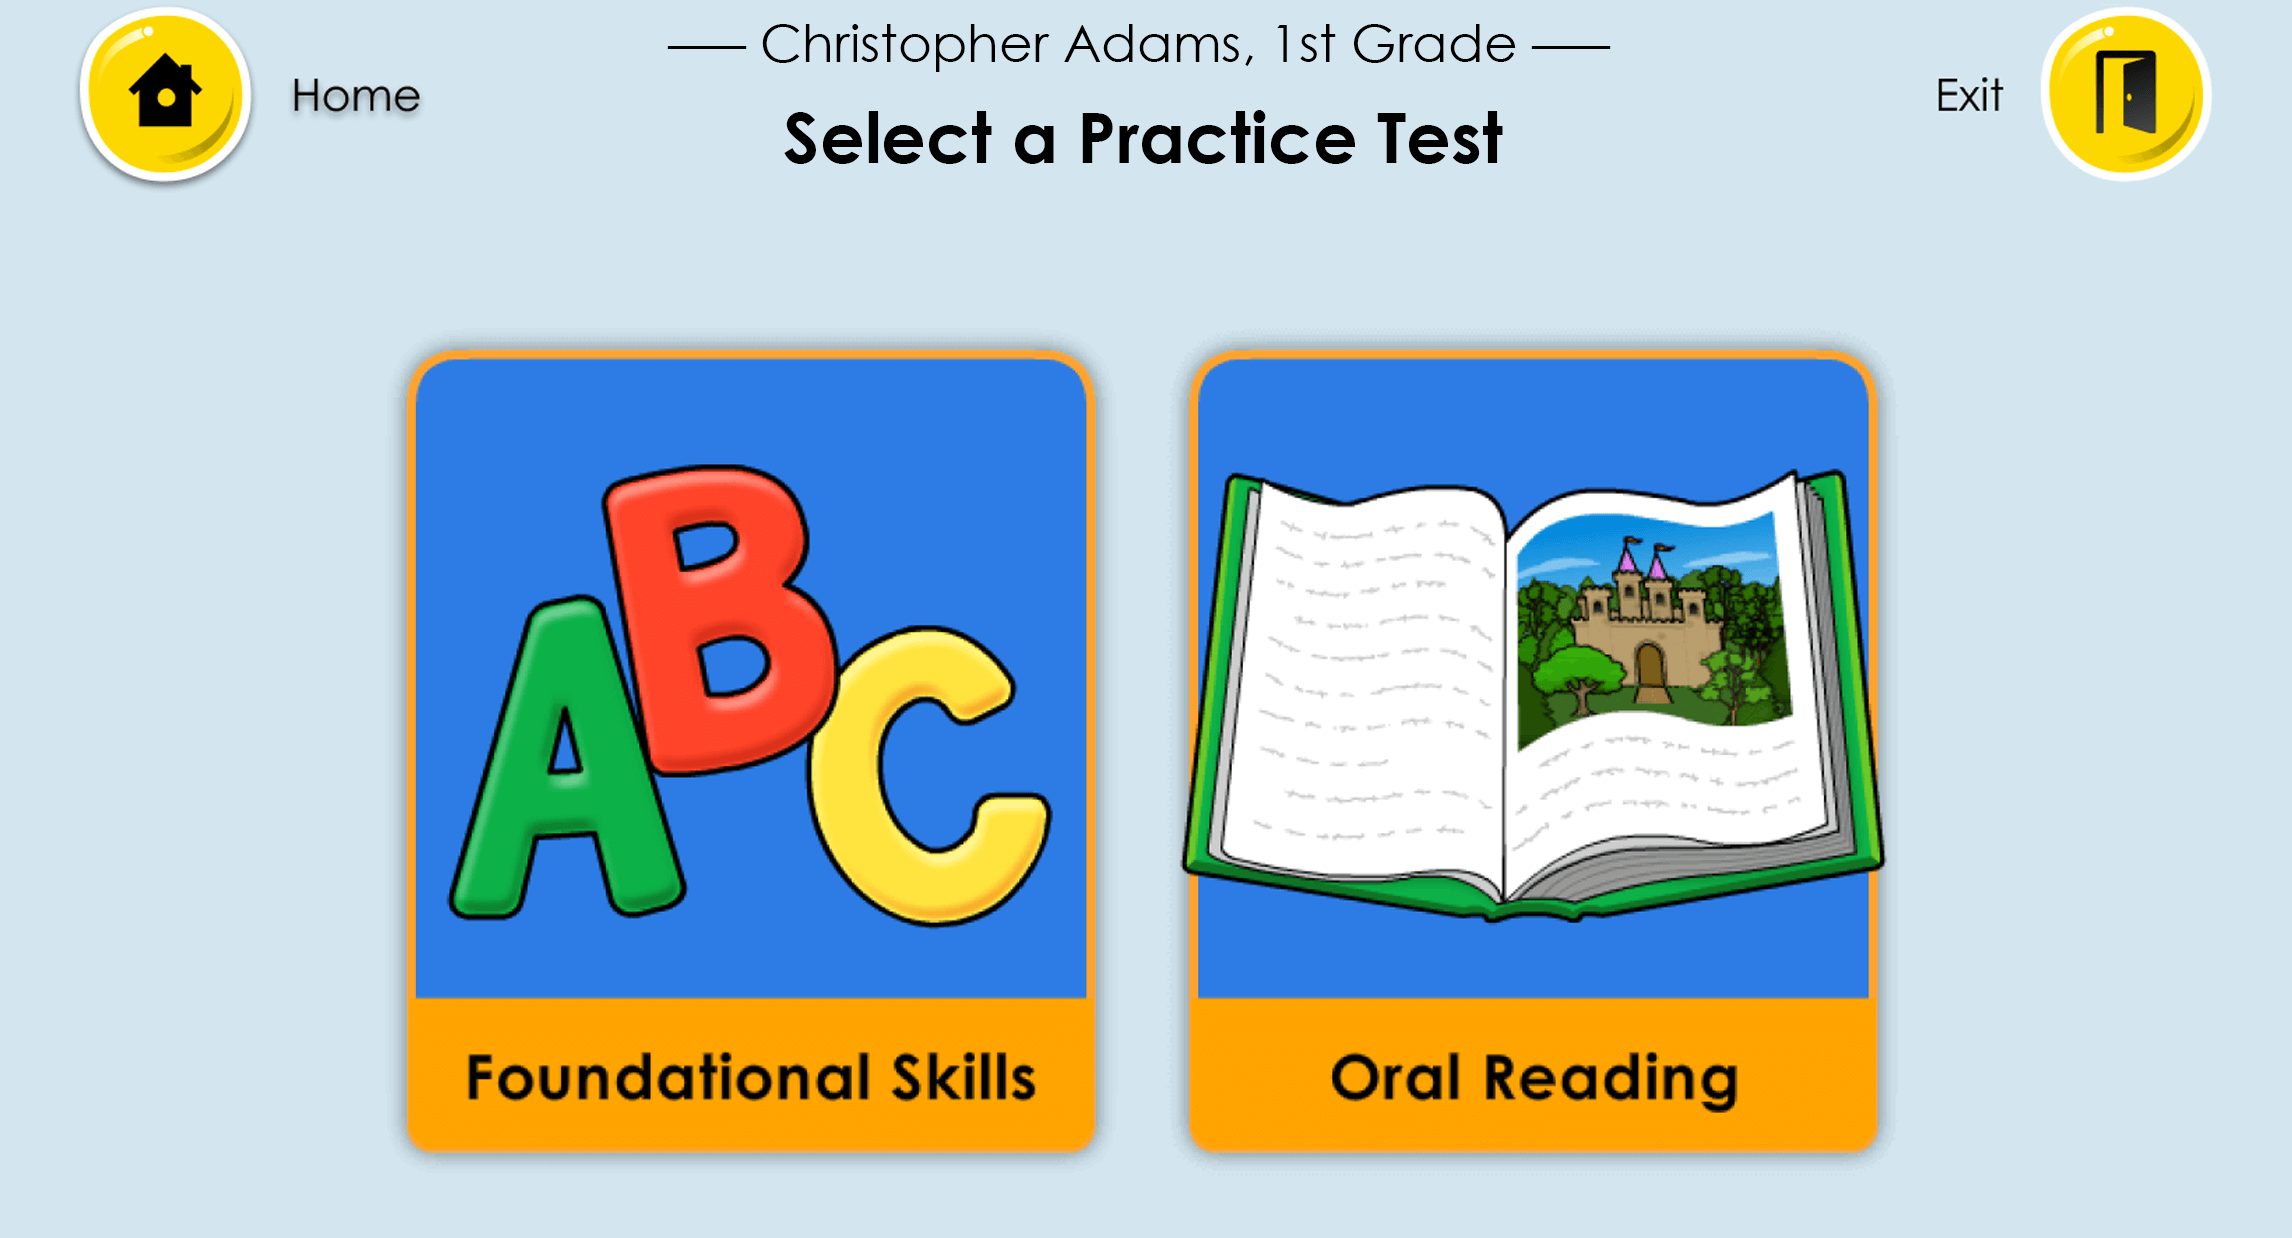 Students taking the Practice Test in English can choose from two options: Foundational Skills or Oral Reading.